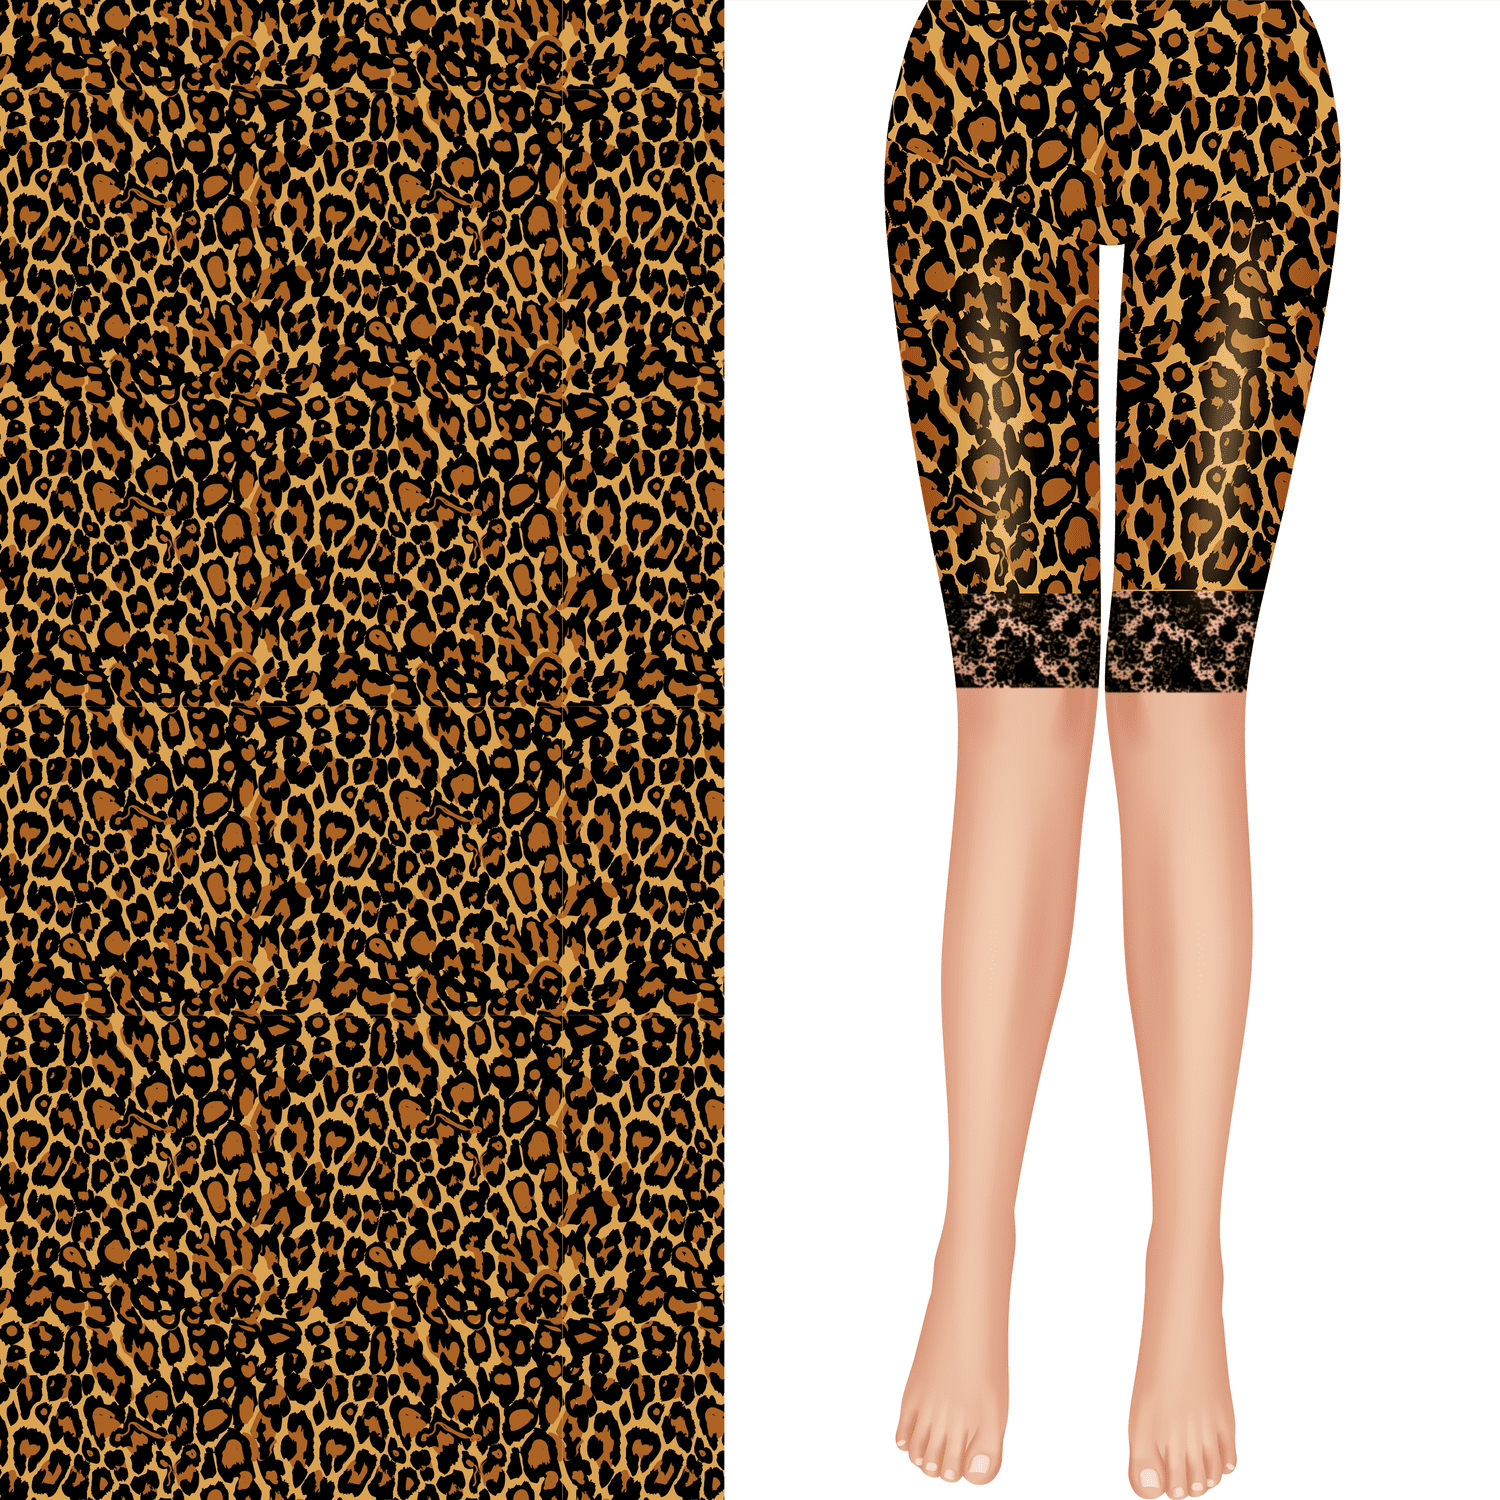 Leopard Print Shorts with Black Lace Trim with Pockets